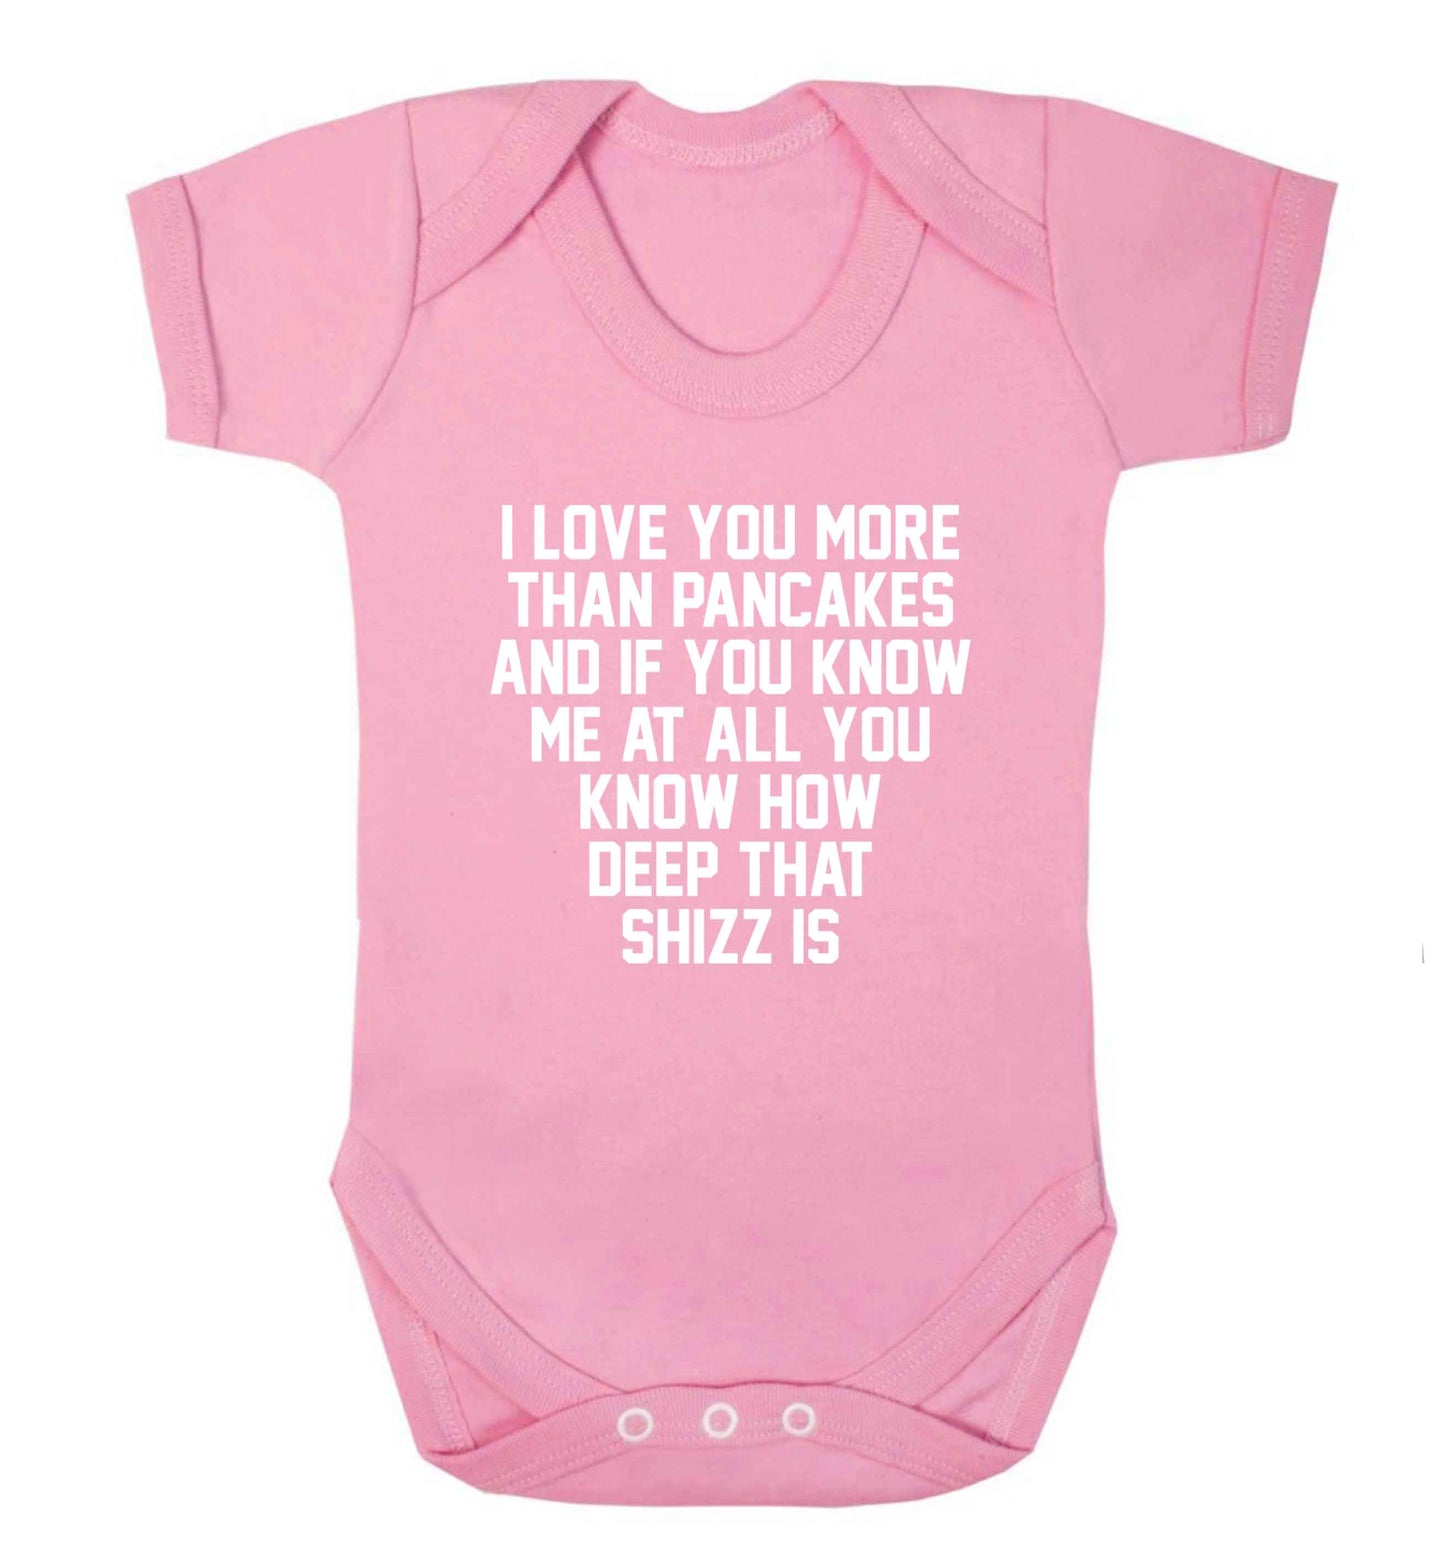 I love you more than pancakes and if you know me at all you know how deep that shizz is baby vest pale pink 18-24 months